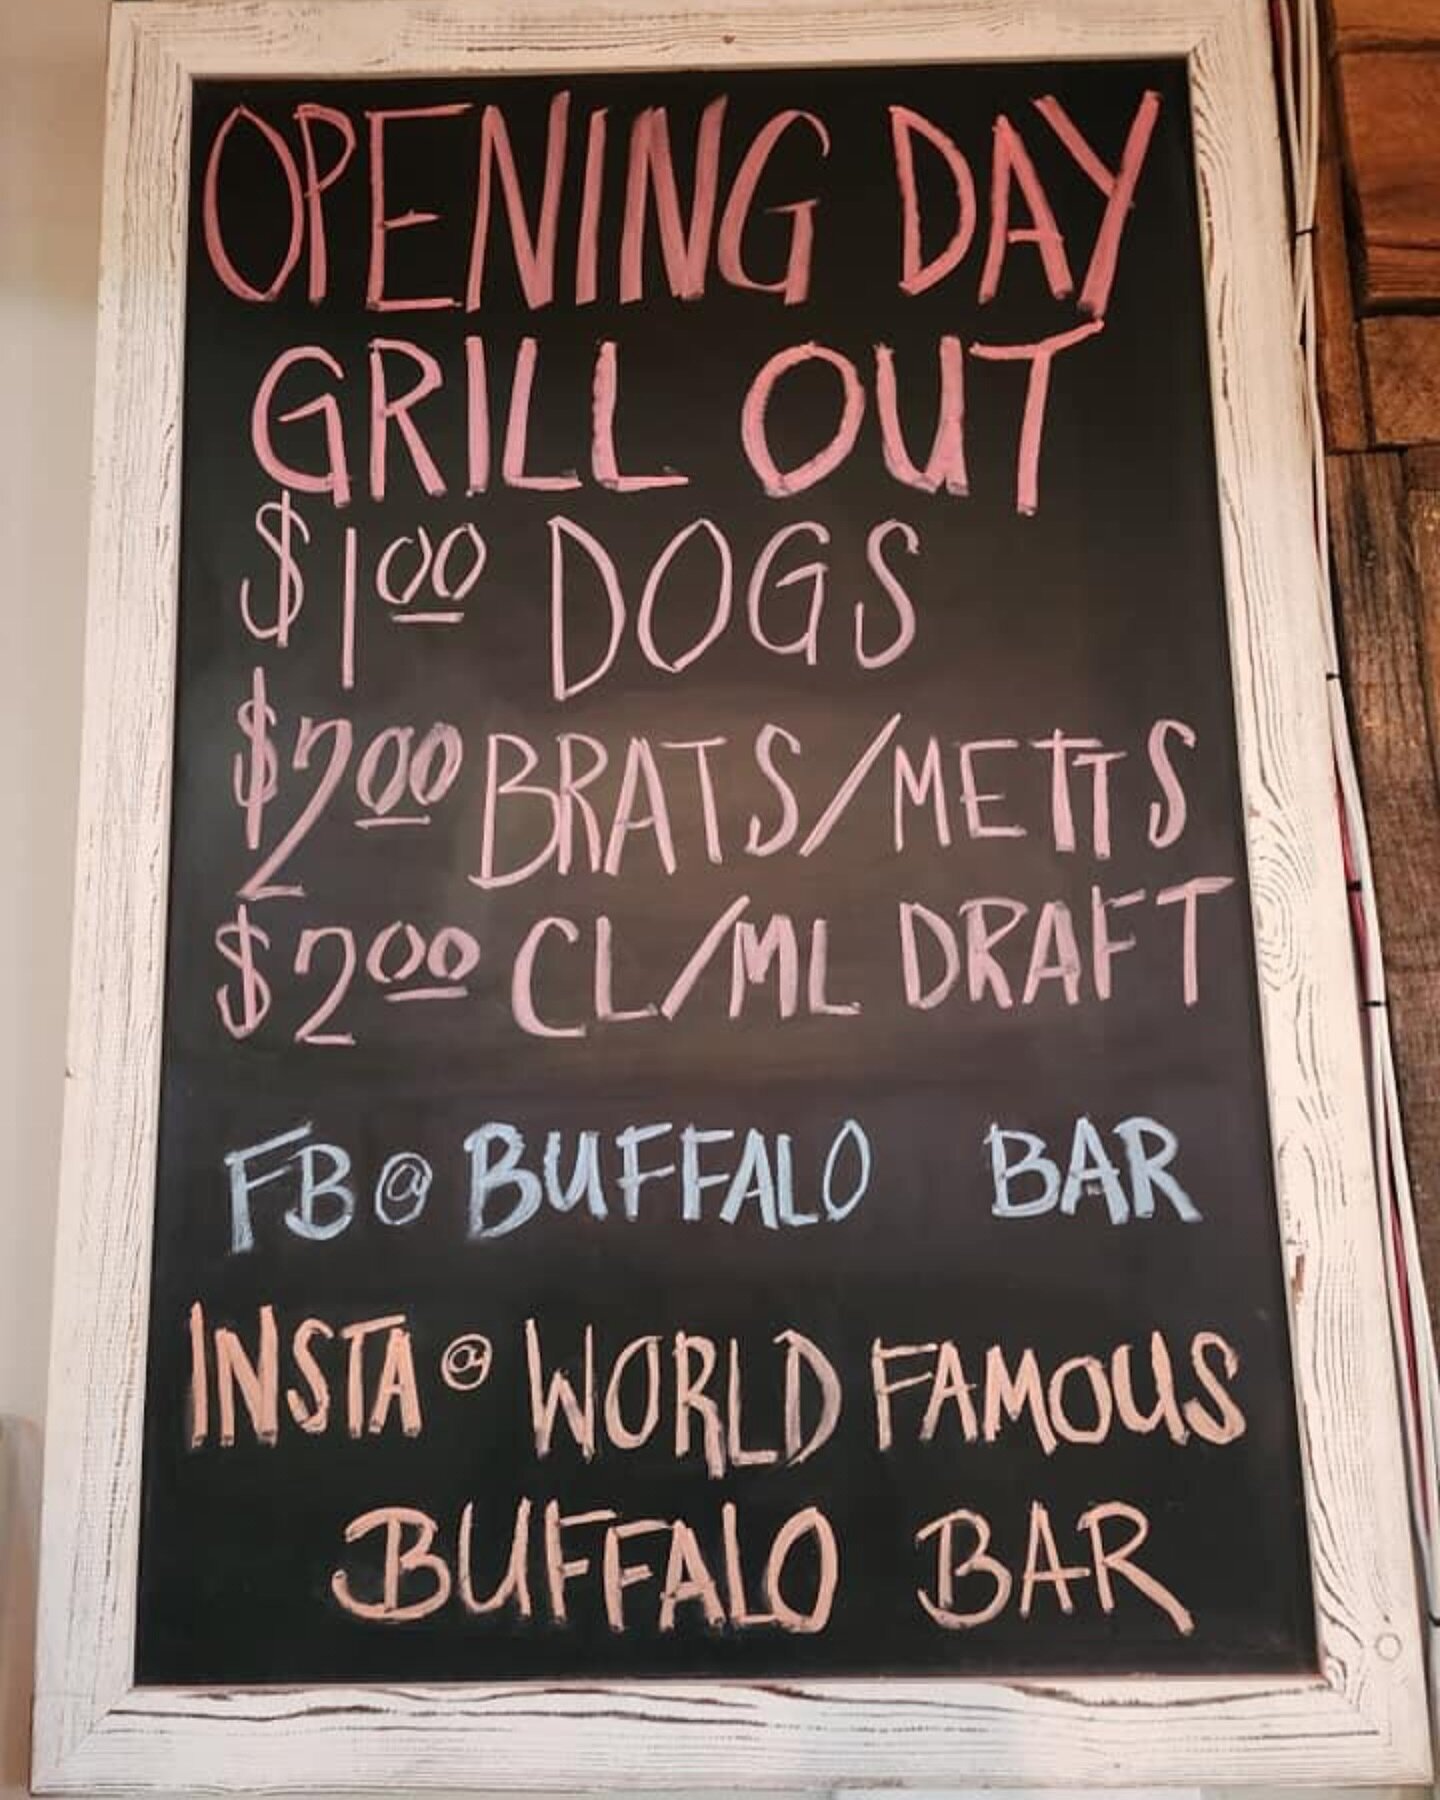 Beautiful weather for a great opening day, Cincinnati! Come see us anytime for specials, watch party &amp; trivia TONIGHT at 7:30! ⚾️ #redsopeningday #baseballseason #openingday #cincinnati #covington #ludlowky #nky #sportsbar #buffalobarky